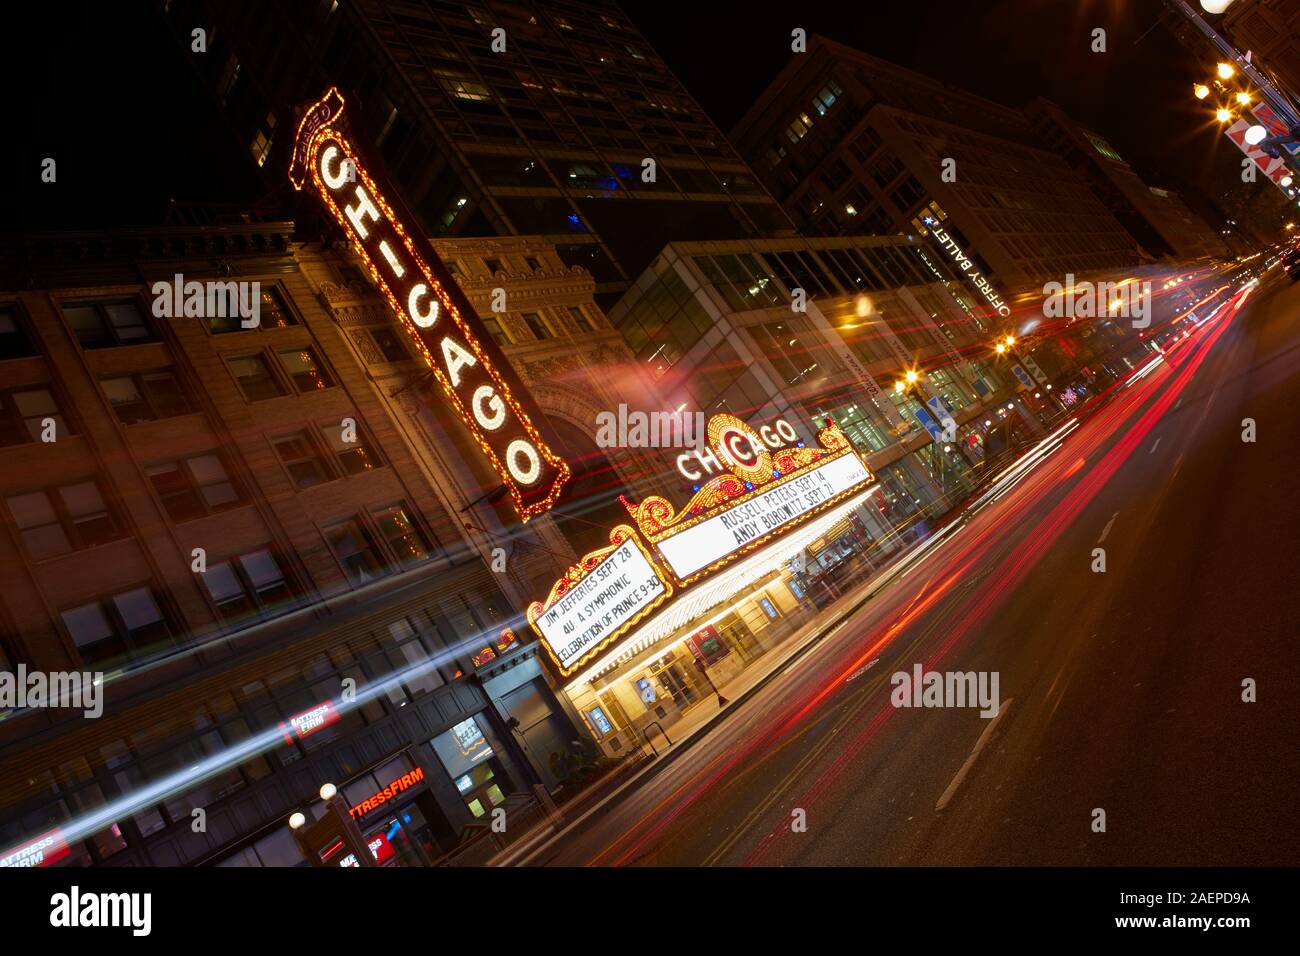 The iconic Chicago theater sign by night, Chicago, Illinois, United States Stock Photo